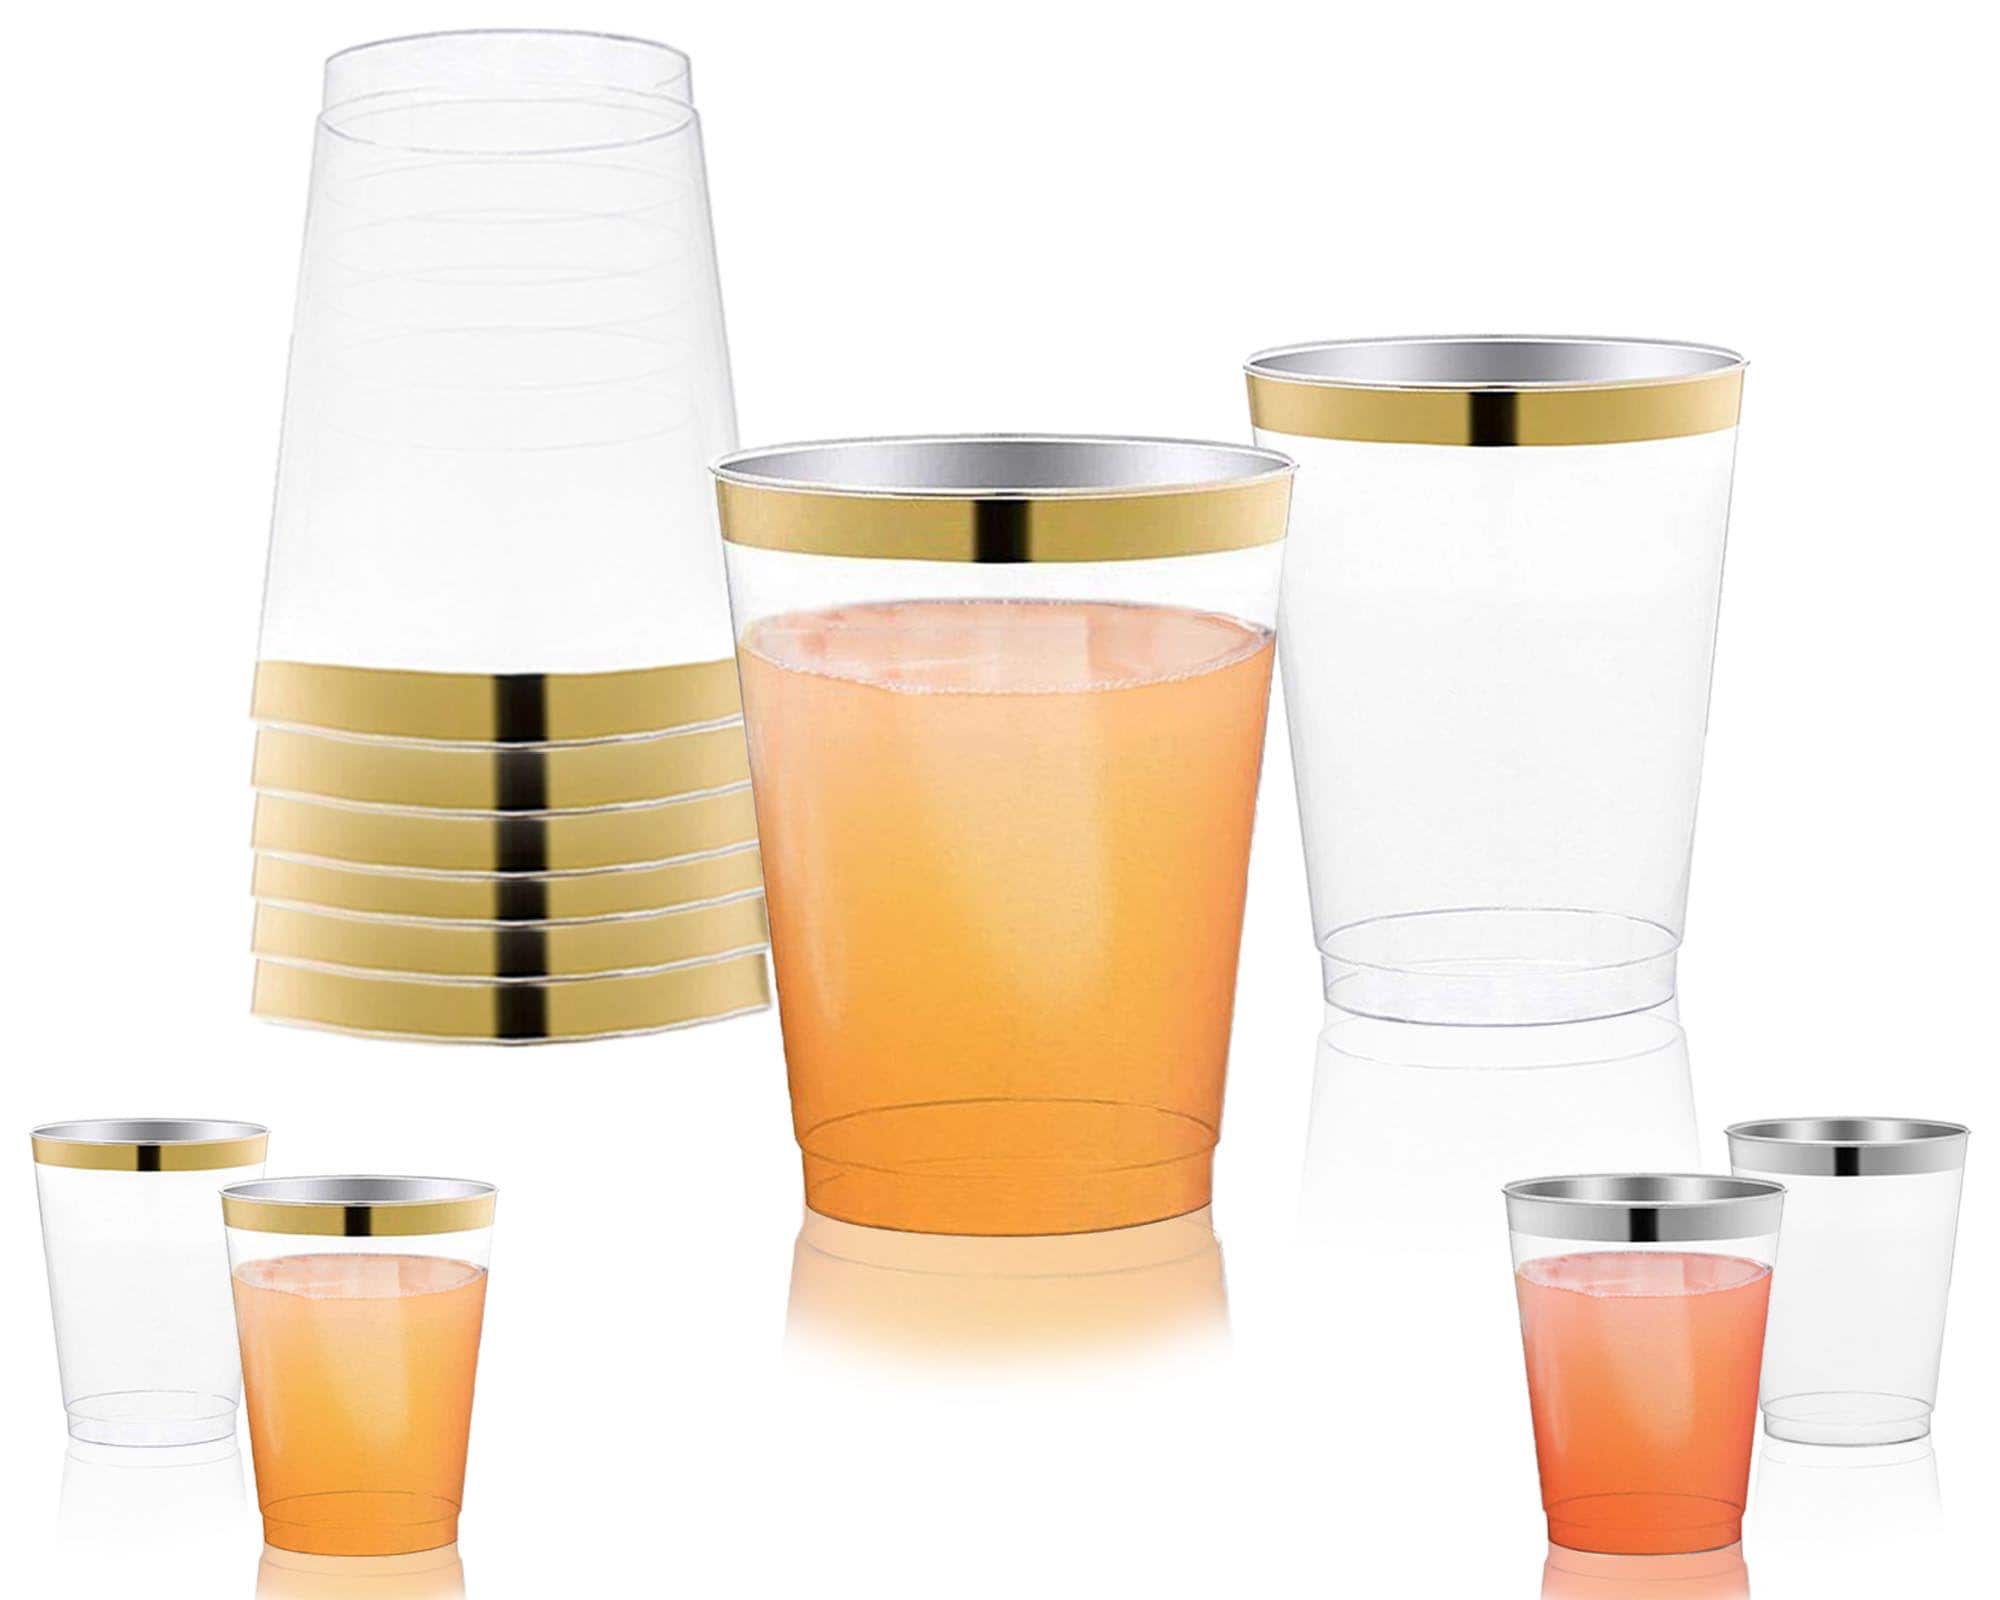 Exquisite Gold Disposable Plastic Cups - 100 Pack 12 oz Plastic Cups - Colored Disposable Cups - Durable Party Cups - Plastic Disposable Drinking